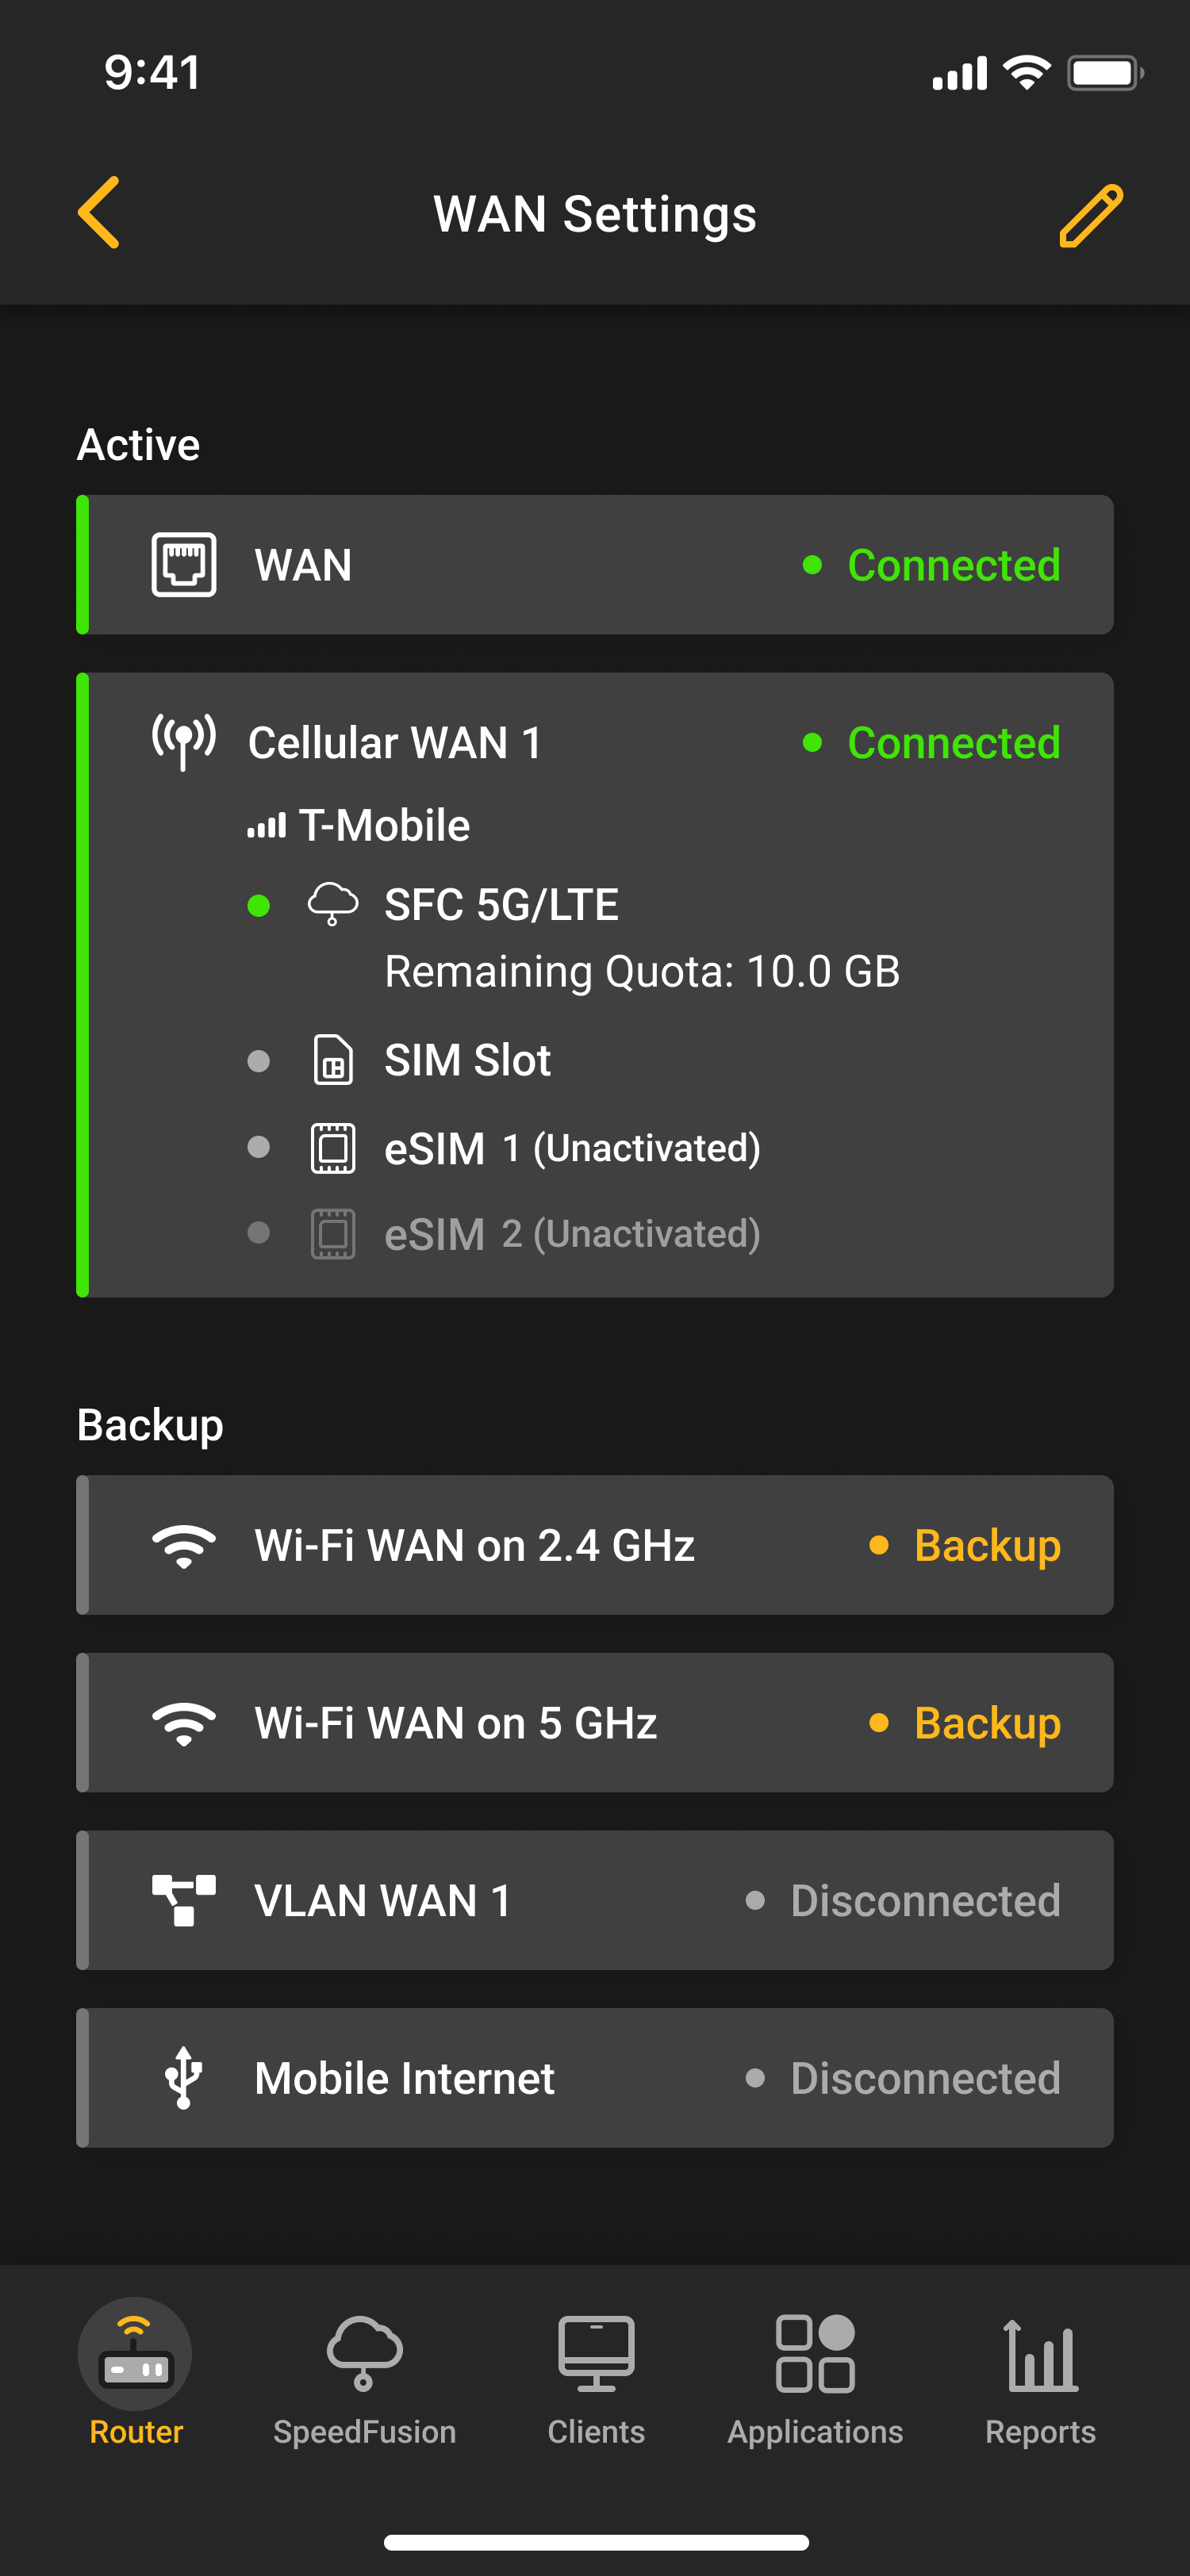 Swap your WAN Priority freely